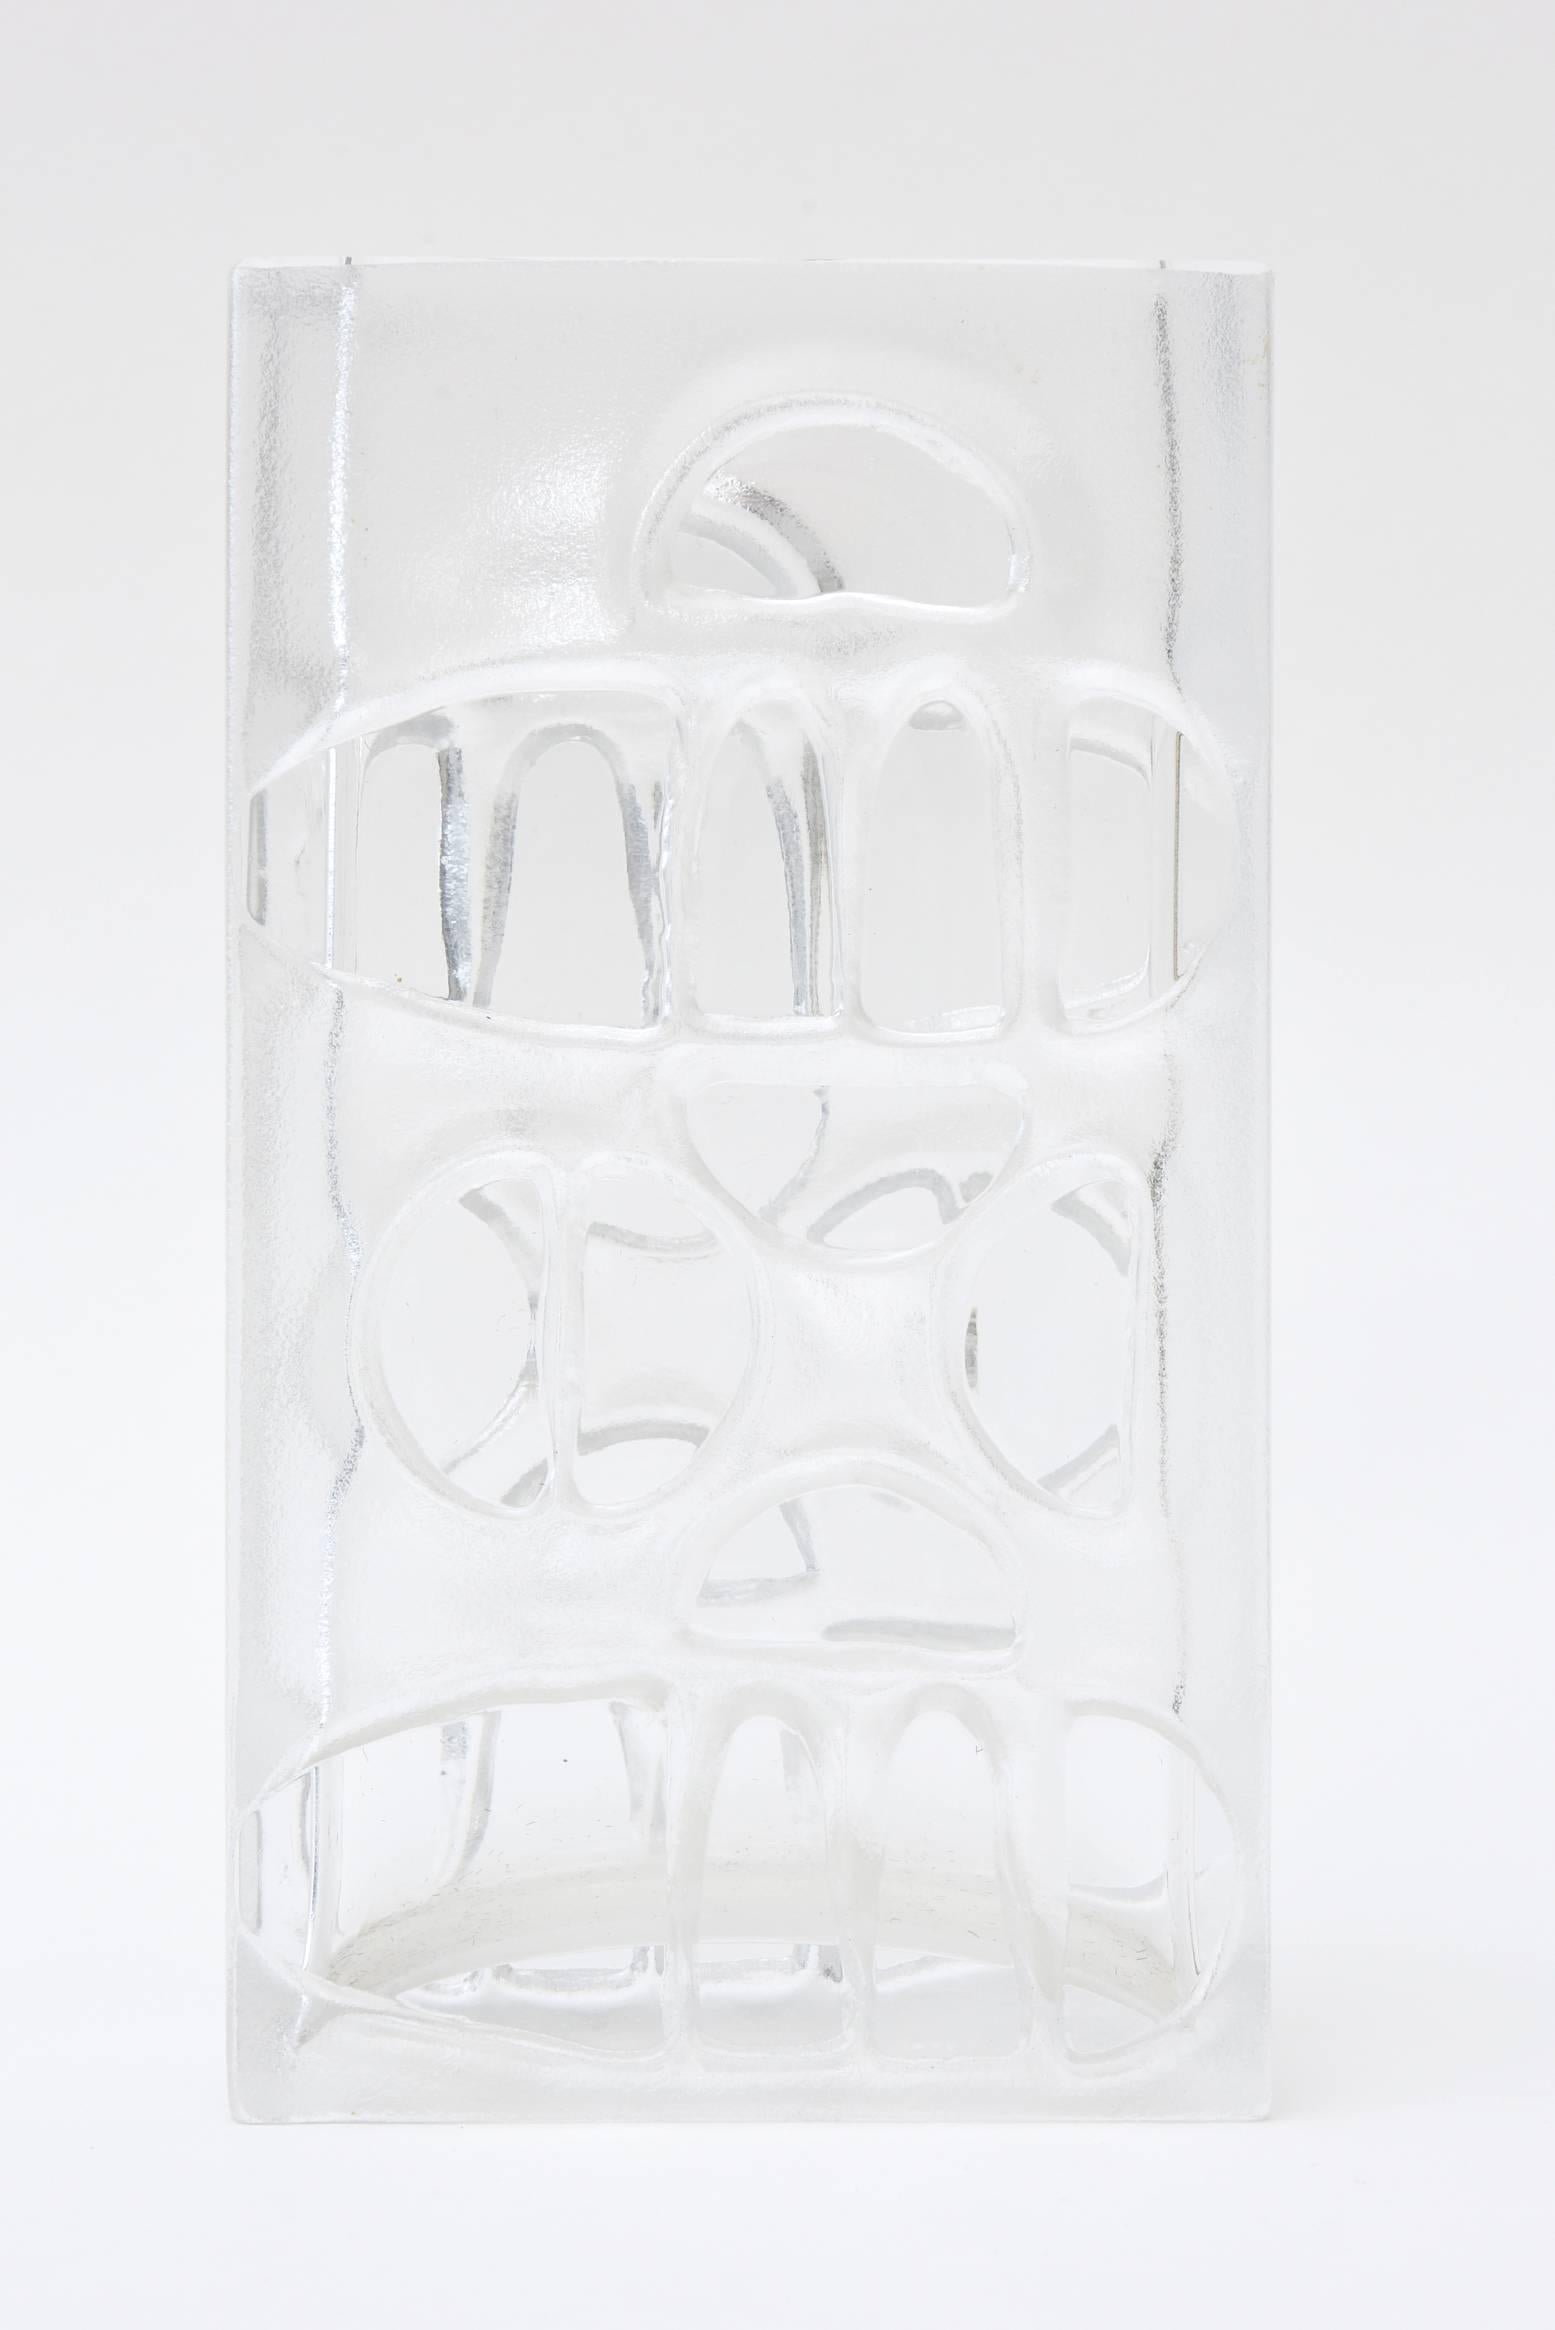 This gorgeous vase that has modernist incised cutout forms is a combination of clear and frosted glass. It has an insignia on the bottom which is the hallmark but after much research we cannot come up with it's maker. This is a beauty and a forever